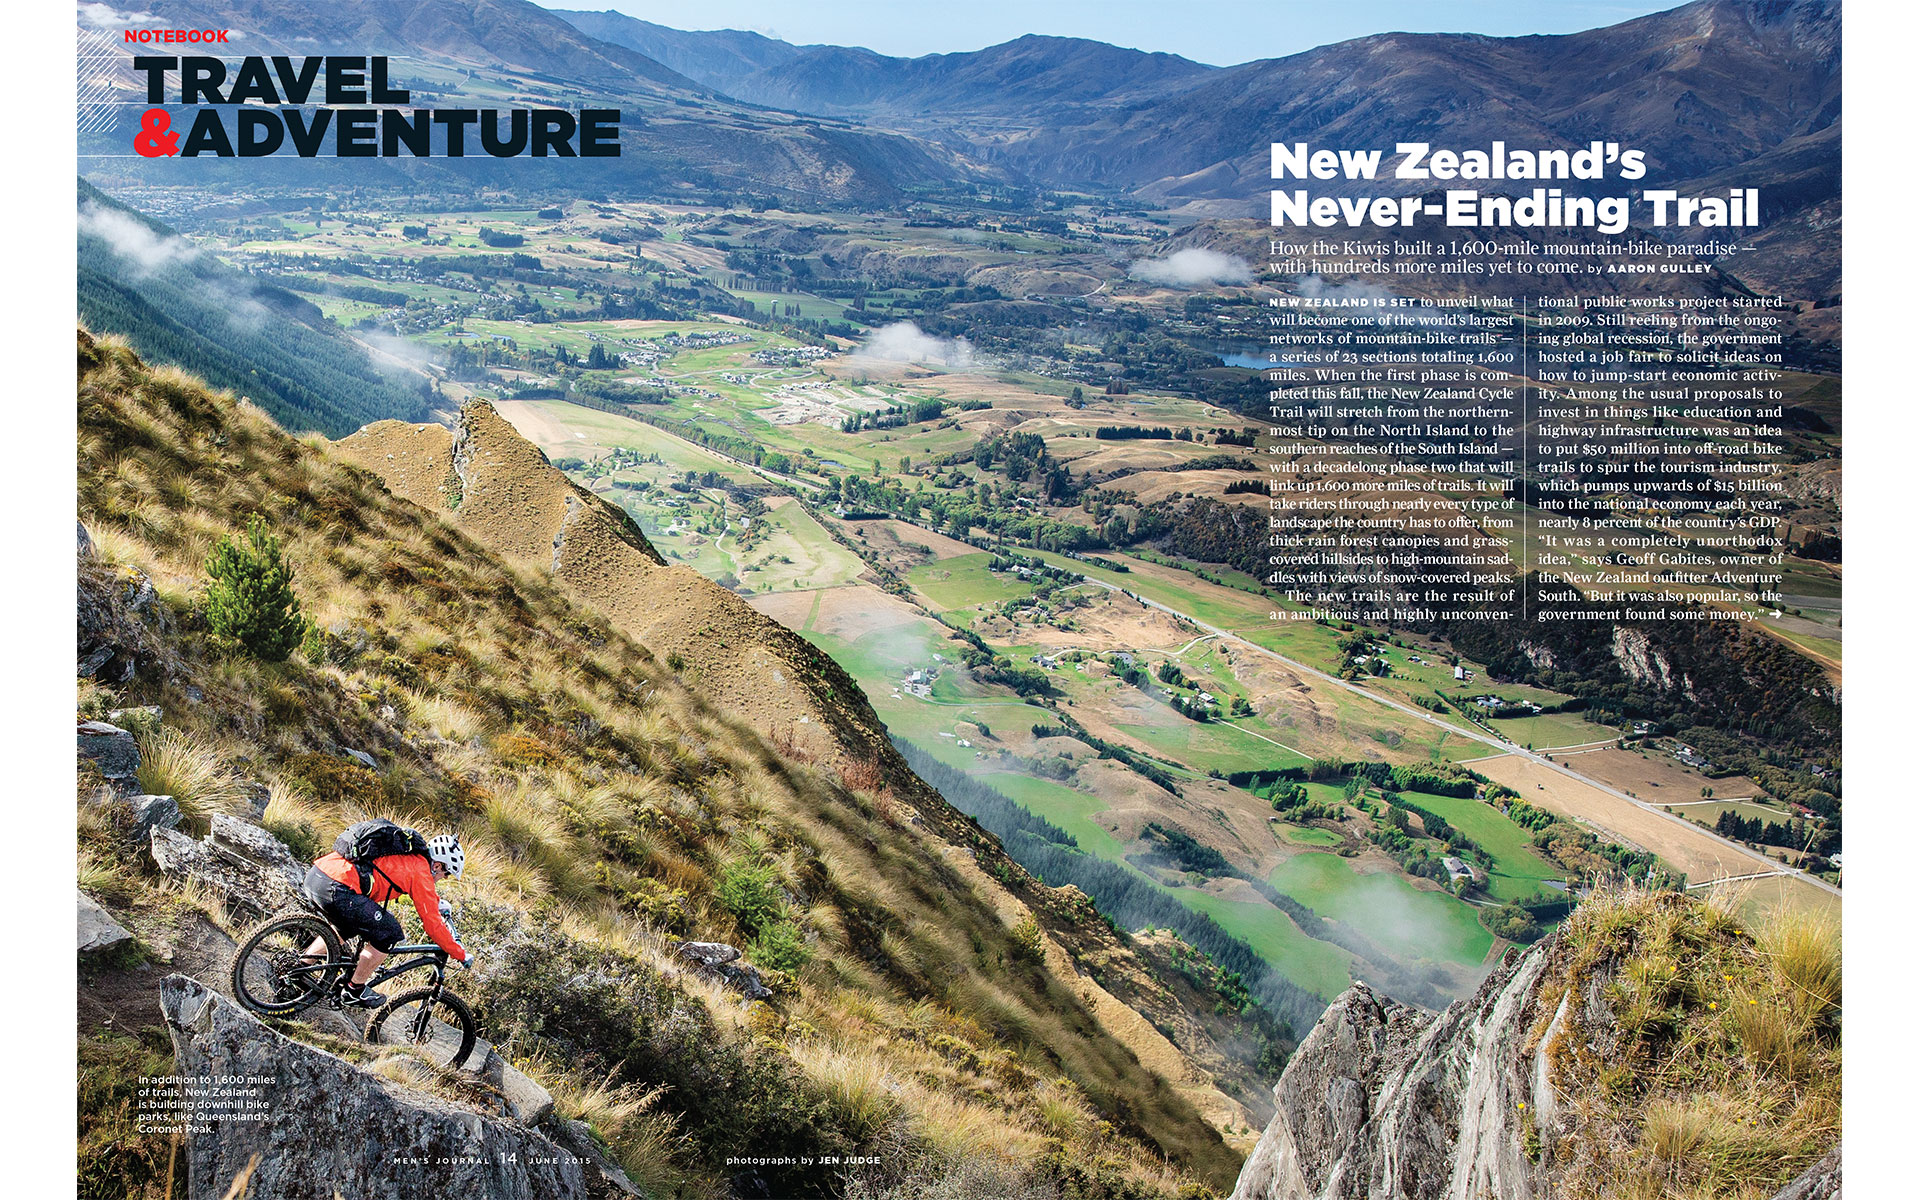 <p style="text-align: center;"><b><font color="2a2871">The Never-Ending Trail, Mens Journal, June 2015</font></b>
</p>
How the Kiwis built a 1,600-mile mountain-bike paradise--with hundreds more miles yet to come.
<p style="text-align: center;"><a href="/users/AaronGulley18670/MJ_NZ_6-15.pdf" onclick="window.open(this.href, '', 'resizable=no,status=no,location=no,toolbar=no,menubar=no,fullscreen=no,scrollbars=no,dependent=no,width=900'); return false;">Read the Story</a></p>
